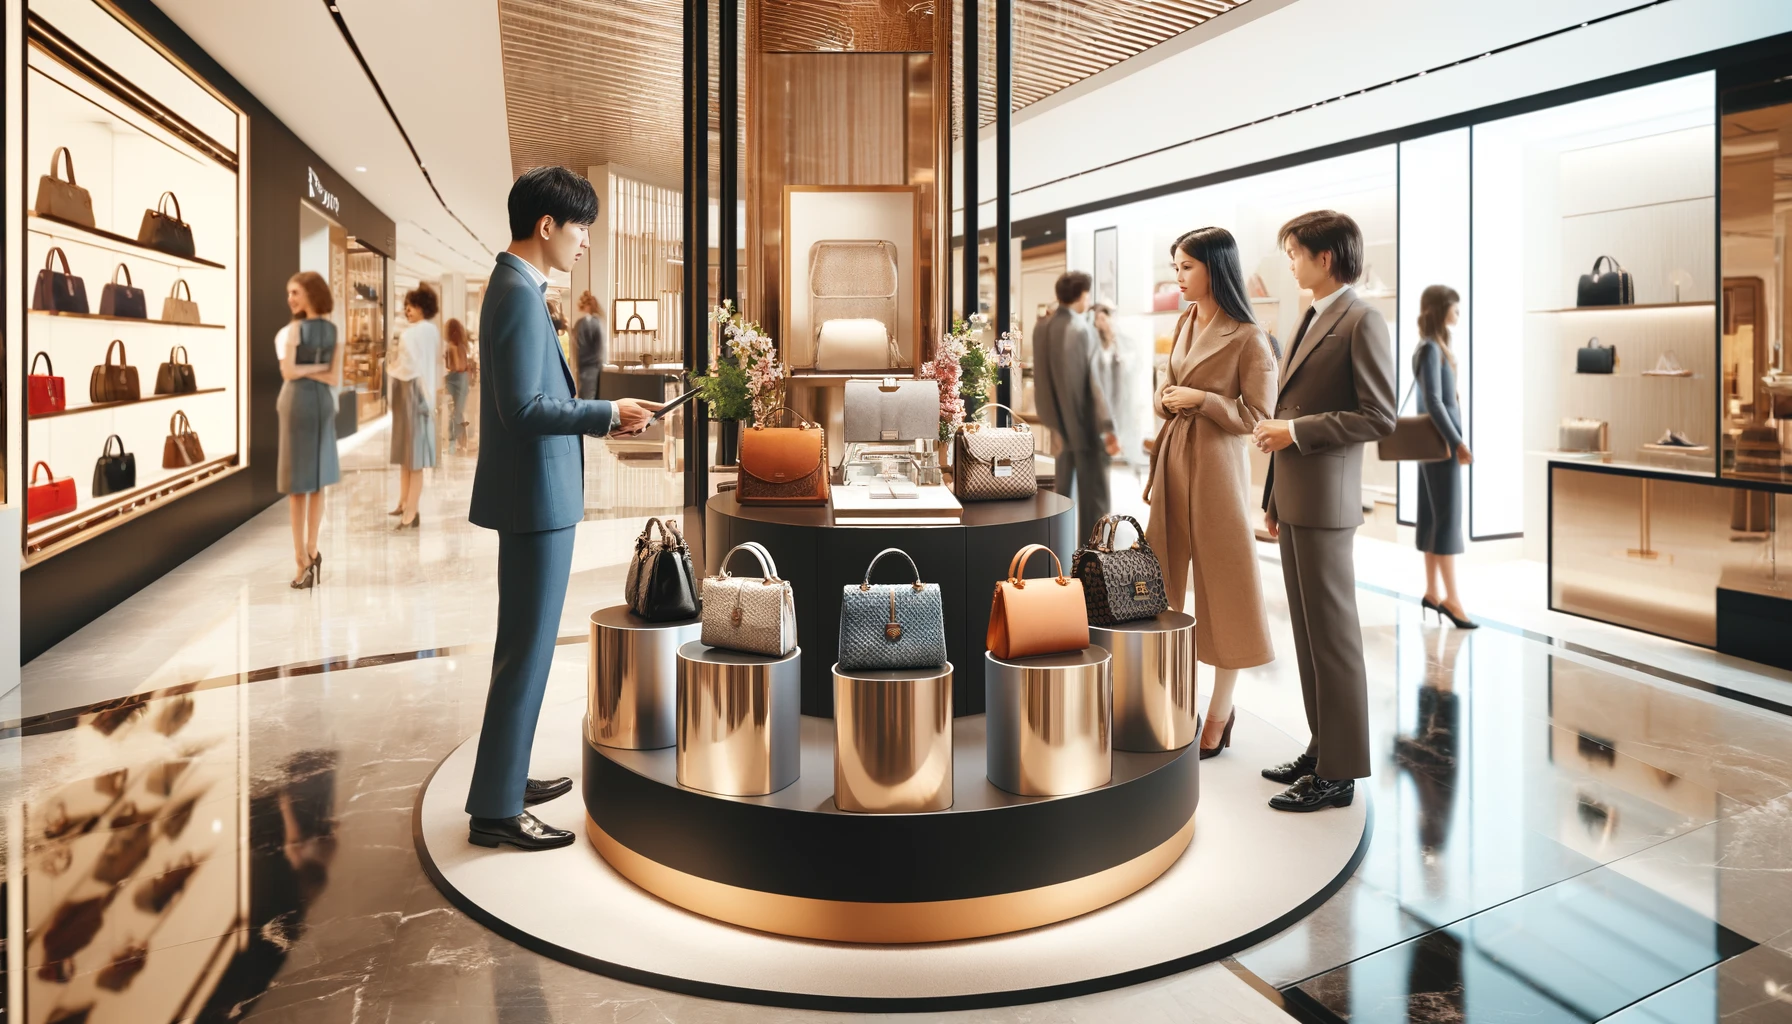 An elegant and sophisticated presentation of a subscription-based luxury handbag rental service in a high-end shopping mall. The setting features a posh, well-lit store with contemporary decor. A variety of premium designer bags are neatly arranged on glossy, modern fixtures. Fashion-conscious customers of different ethnicities examine the bags, while a friendly staff member explains the subscription details. The mall ambiance includes other luxury stores in the background, enhancing the upscale shopping experience.